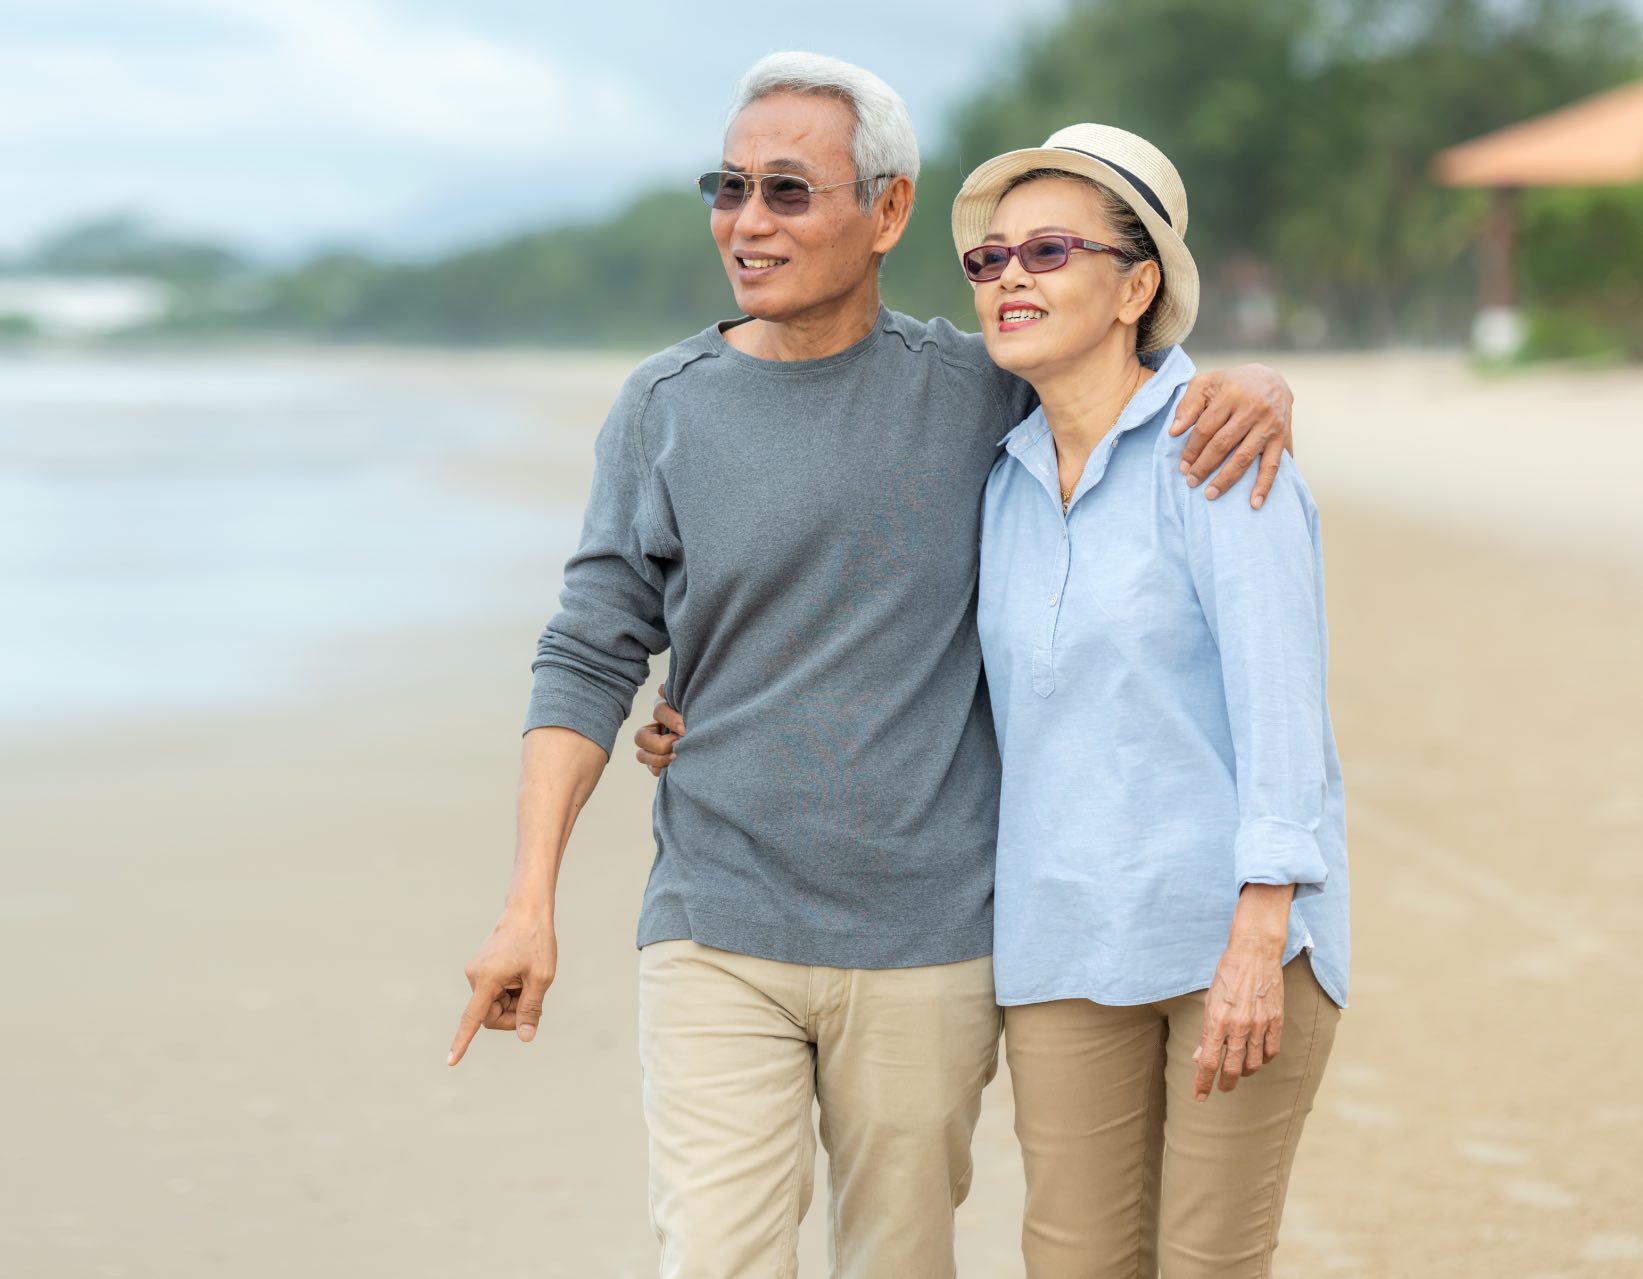 This couple enjoys an evening walk on the beach as their daily exercise to help reduce chronic pain with Chronic Care of Richmond.